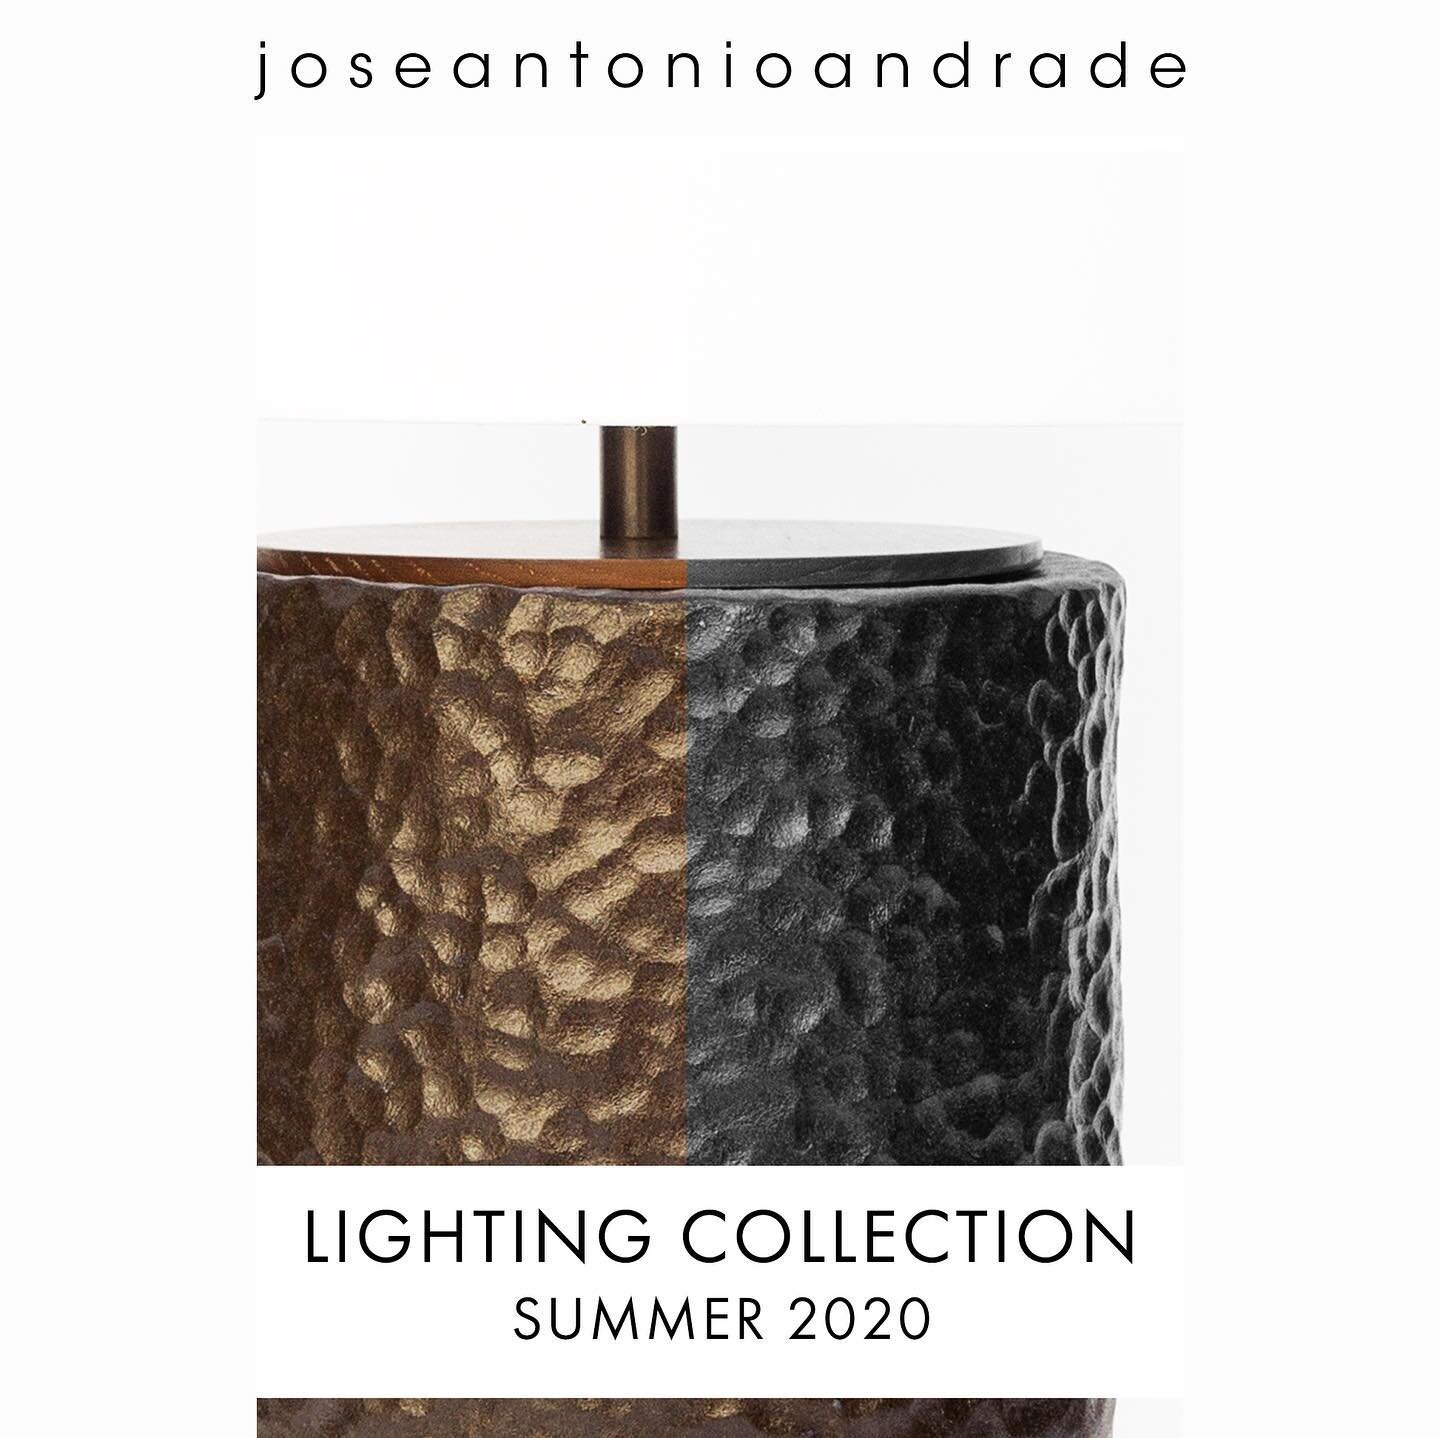 CERAMIC LIGHTING COLLECTION PART I
DIGITAL EXHIBITION SUMMER 2020 EXCLUSIVE DESIGNS

Discover the new collection featuring ceramic lighting, large vases and objects, available now at joseantonioandrade.com
.
.
.

#pottery #ceramics #ceramic #vase #in